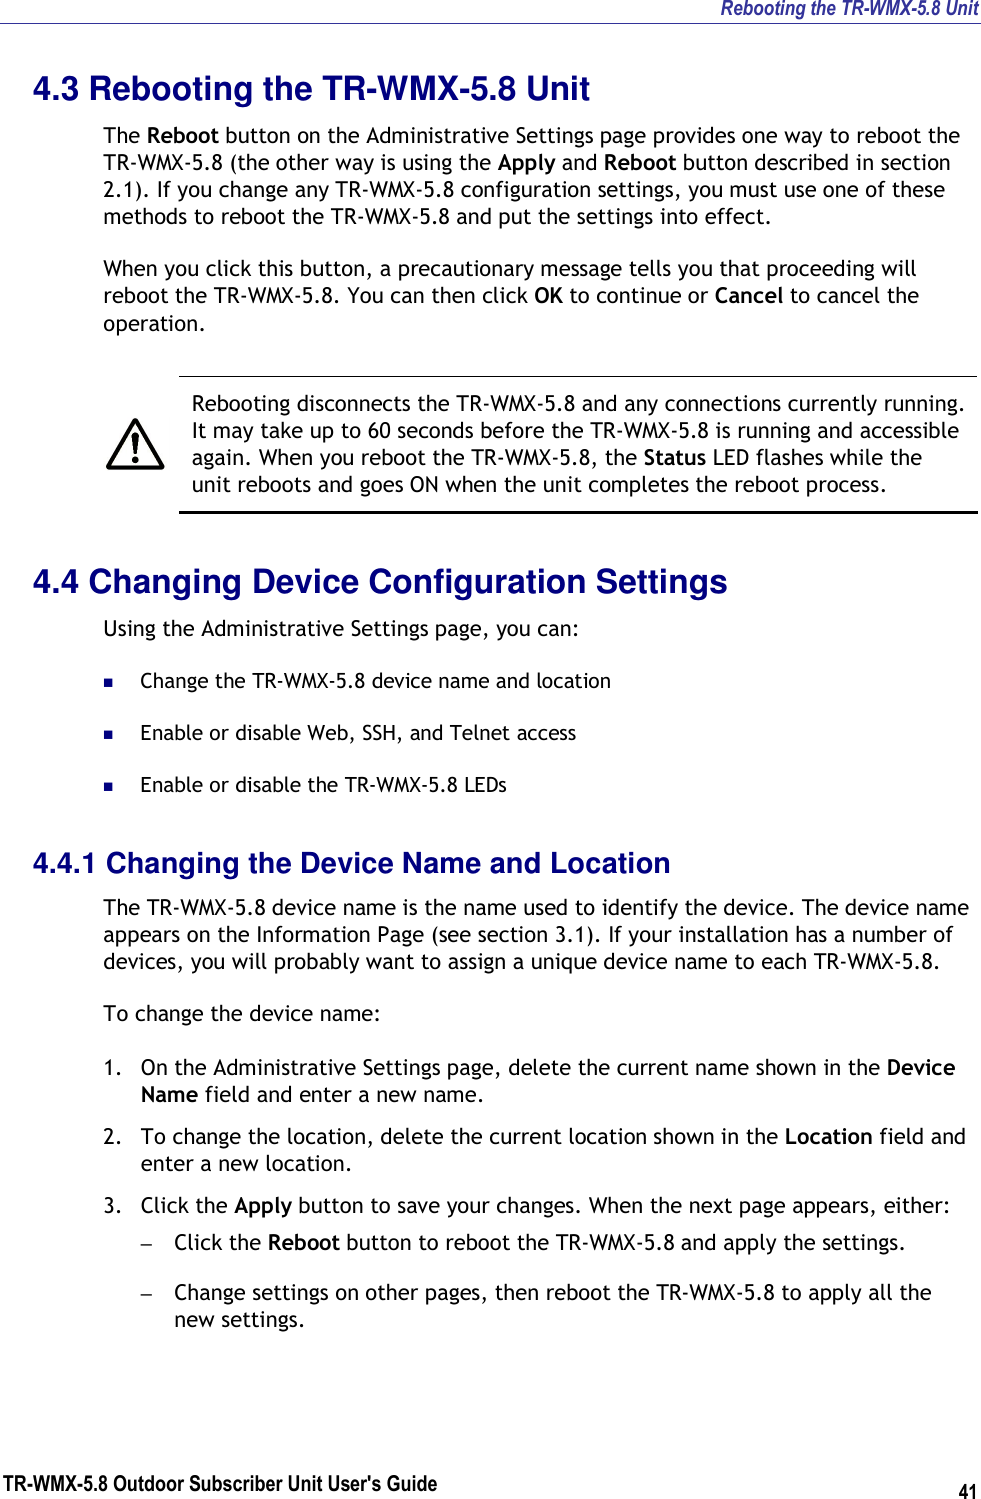 Rebooting the TR-WMX-5.8 Unit TR-WMX-5.8 Outdoor Subscriber Unit User&apos;s Guide 41 4.3 Rebooting the TR-WMX-5.8 Unit The Reboot button on the Administrative Settings page provides one way to reboot the TR-WMX-5.8 (the other way is using the Apply and Reboot button described in section 2.1). If you change any TR-WMX-5.8 configuration settings, you must use one of these methods to reboot the TR-WMX-5.8 and put the settings into effect. When you click this button, a precautionary message tells you that proceeding will reboot the TR-WMX-5.8. You can then click OK to continue or Cancel to cancel the operation.    Rebooting disconnects the TR-WMX-5.8 and any connections currently running. It may take up to 60 seconds before the TR-WMX-5.8 is running and accessible again. When you reboot the TR-WMX-5.8, the Status LED flashes while the unit reboots and goes ON when the unit completes the reboot process. 4.4 Changing Device Configuration Settings Using the Administrative Settings page, you can:  Change the TR-WMX-5.8 device name and location  Enable or disable Web, SSH, and Telnet access  Enable or disable the TR-WMX-5.8 LEDs 4.4.1 Changing the Device Name and Location The TR-WMX-5.8 device name is the name used to identify the device. The device name appears on the Information Page (see section 3.1). If your installation has a number of devices, you will probably want to assign a unique device name to each TR-WMX-5.8. To change the device name: 1. On the Administrative Settings page, delete the current name shown in the Device Name field and enter a new name. 2. To change the location, delete the current location shown in the Location field and enter a new location. 3. Click the Apply button to save your changes. When the next page appears, either: – Click the Reboot button to reboot the TR-WMX-5.8 and apply the settings. – Change settings on other pages, then reboot the TR-WMX-5.8 to apply all the new settings. 